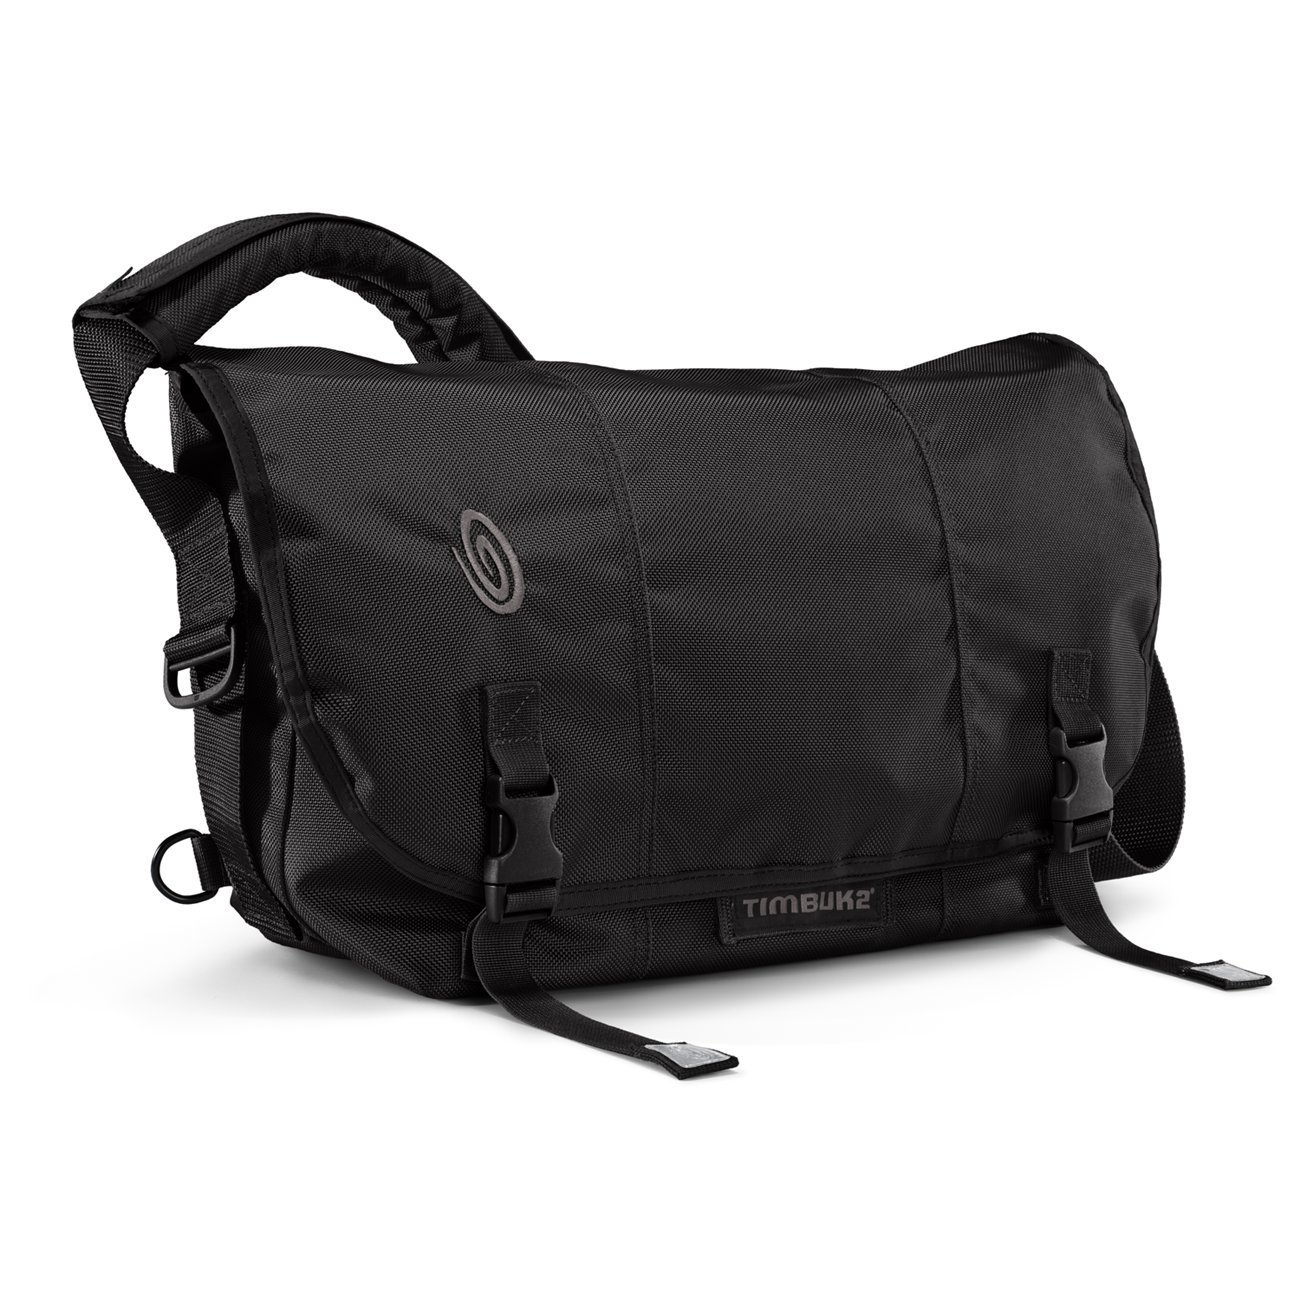 5 Best Timbuk2 Messenger Bag - Your reliable choice - Tool Box